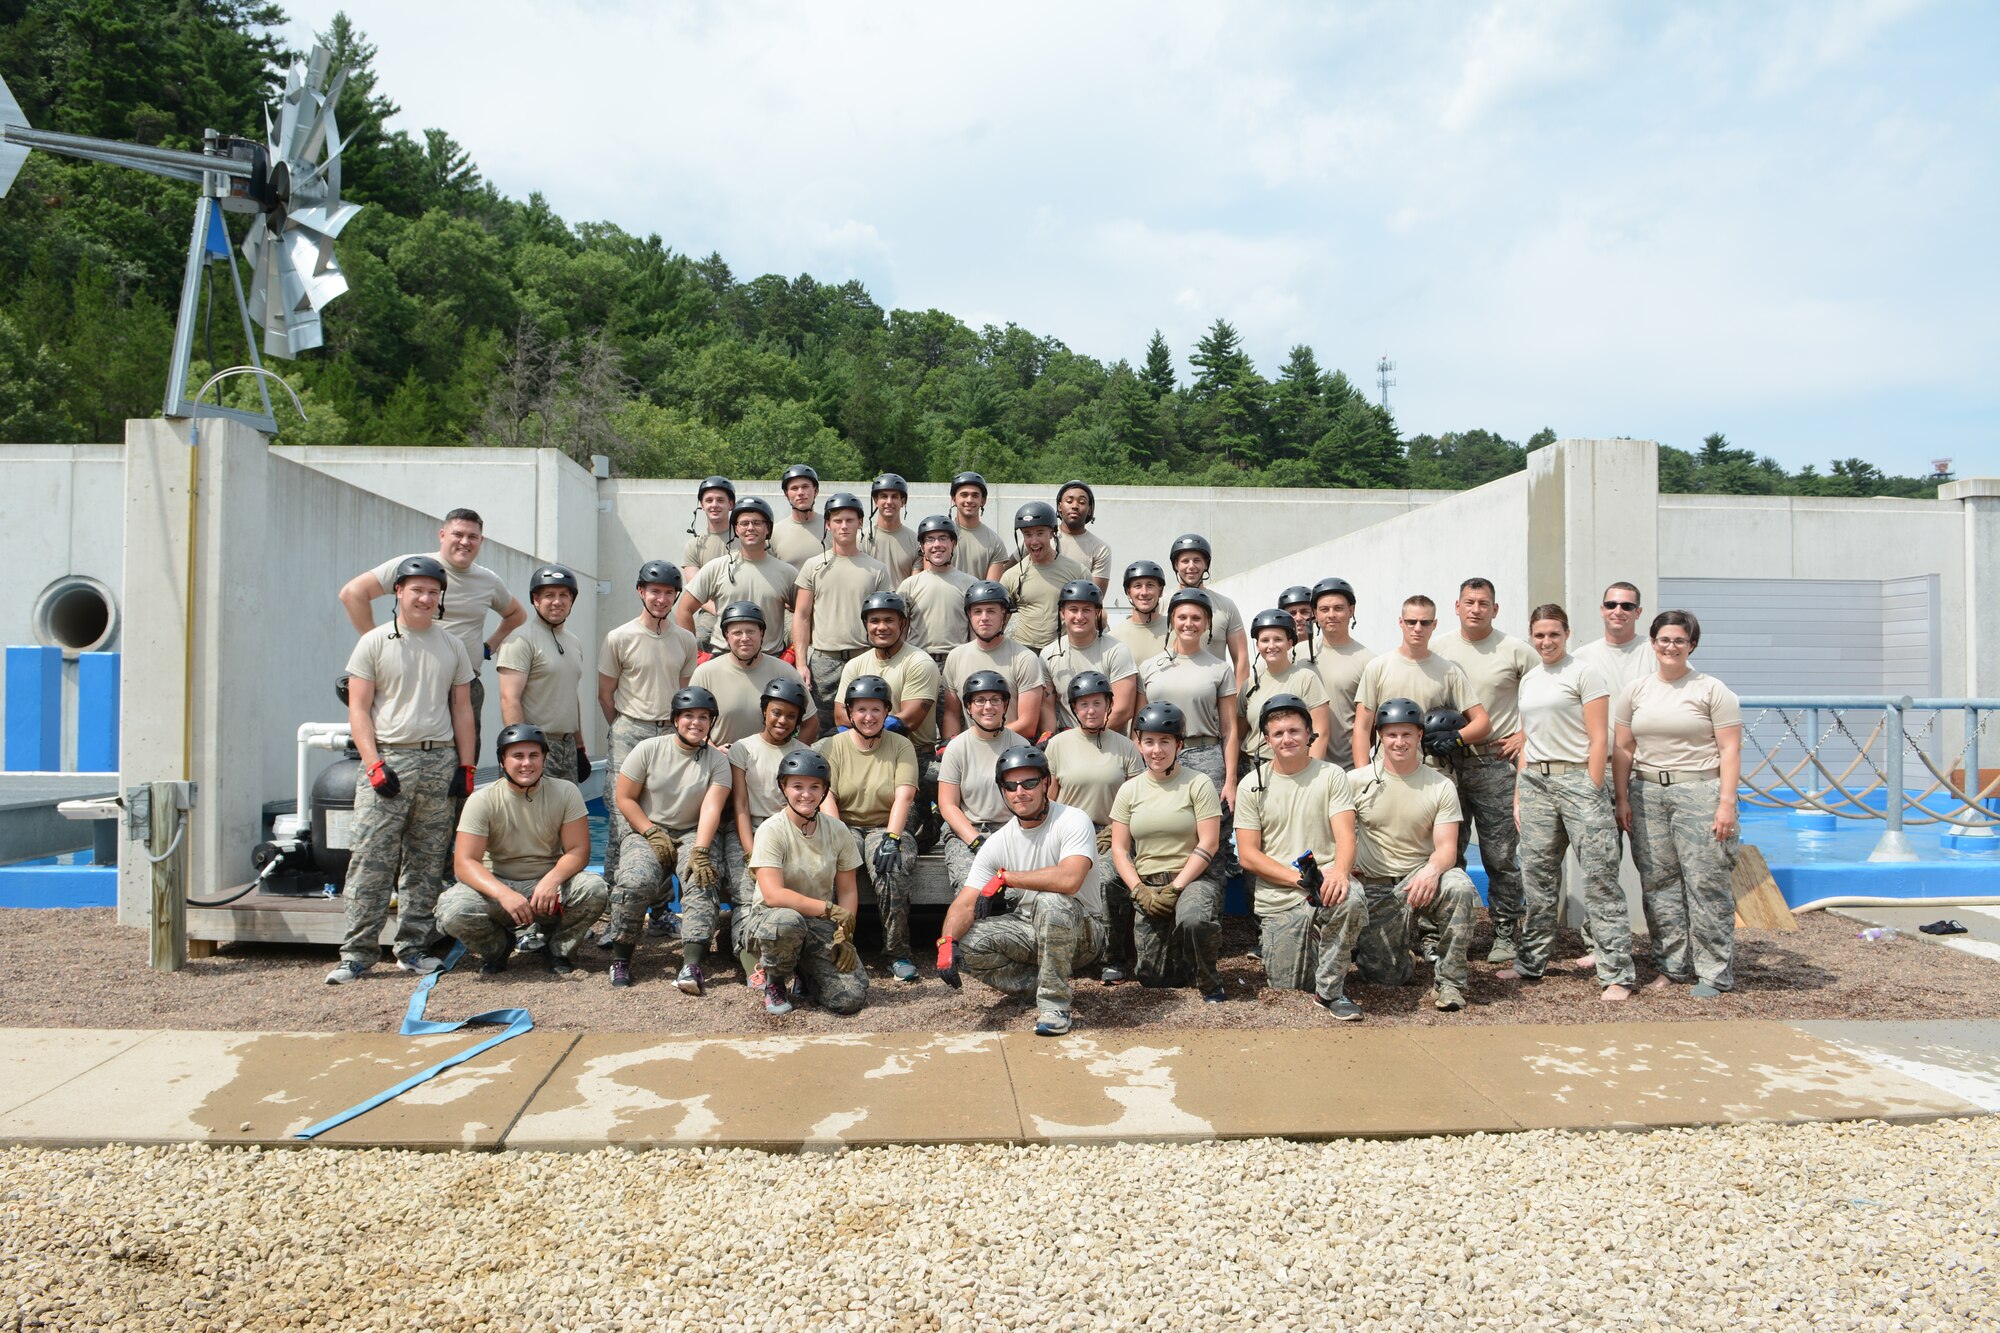 Thirty-three Airmen and their first sergeants pose in front of one of the Leadership Development Course water obstacles at the Volk Field Air National Guard Base, Camp Douglas, Wis., July 27, 2016. Airmen traveled from across the state of Wisconsin to participate in the Junior Enlisted Orientation Program held throughout the state July 26-28.